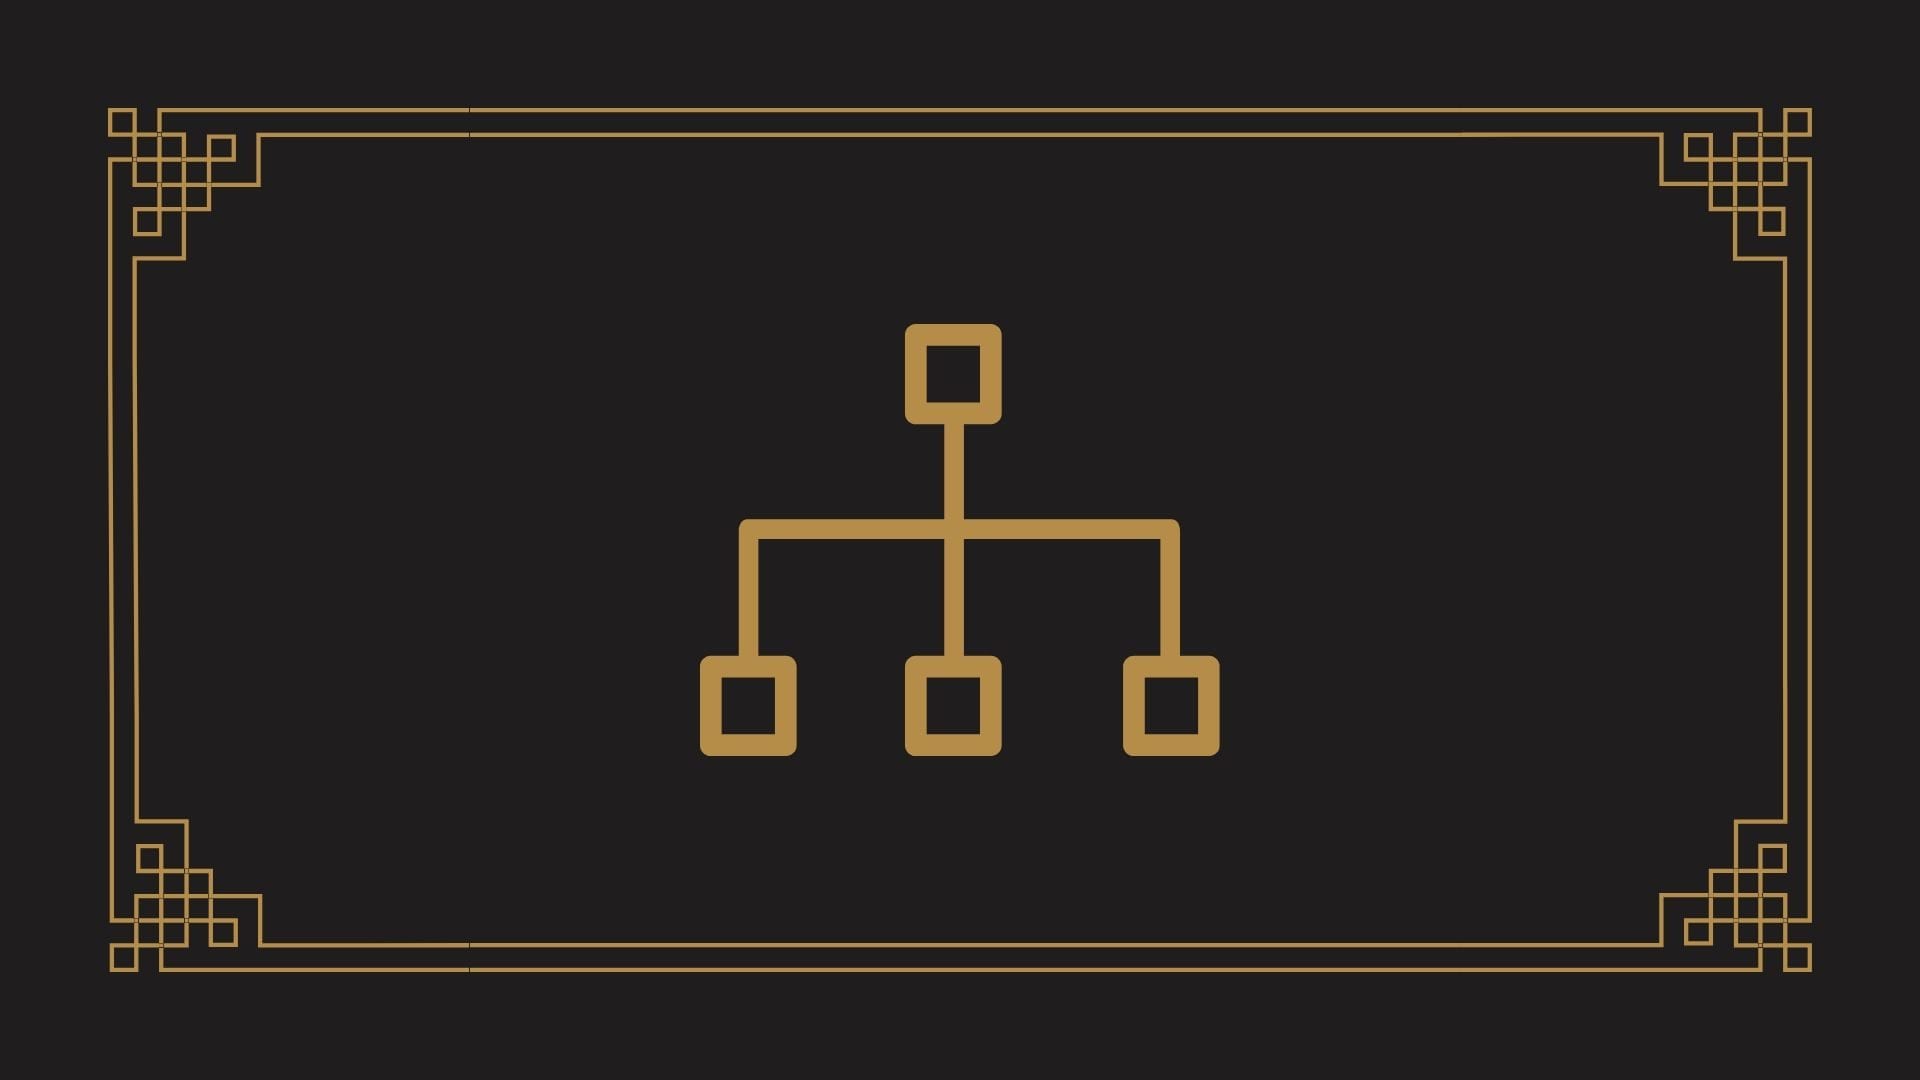 A golden silo diagram crown on a black background.